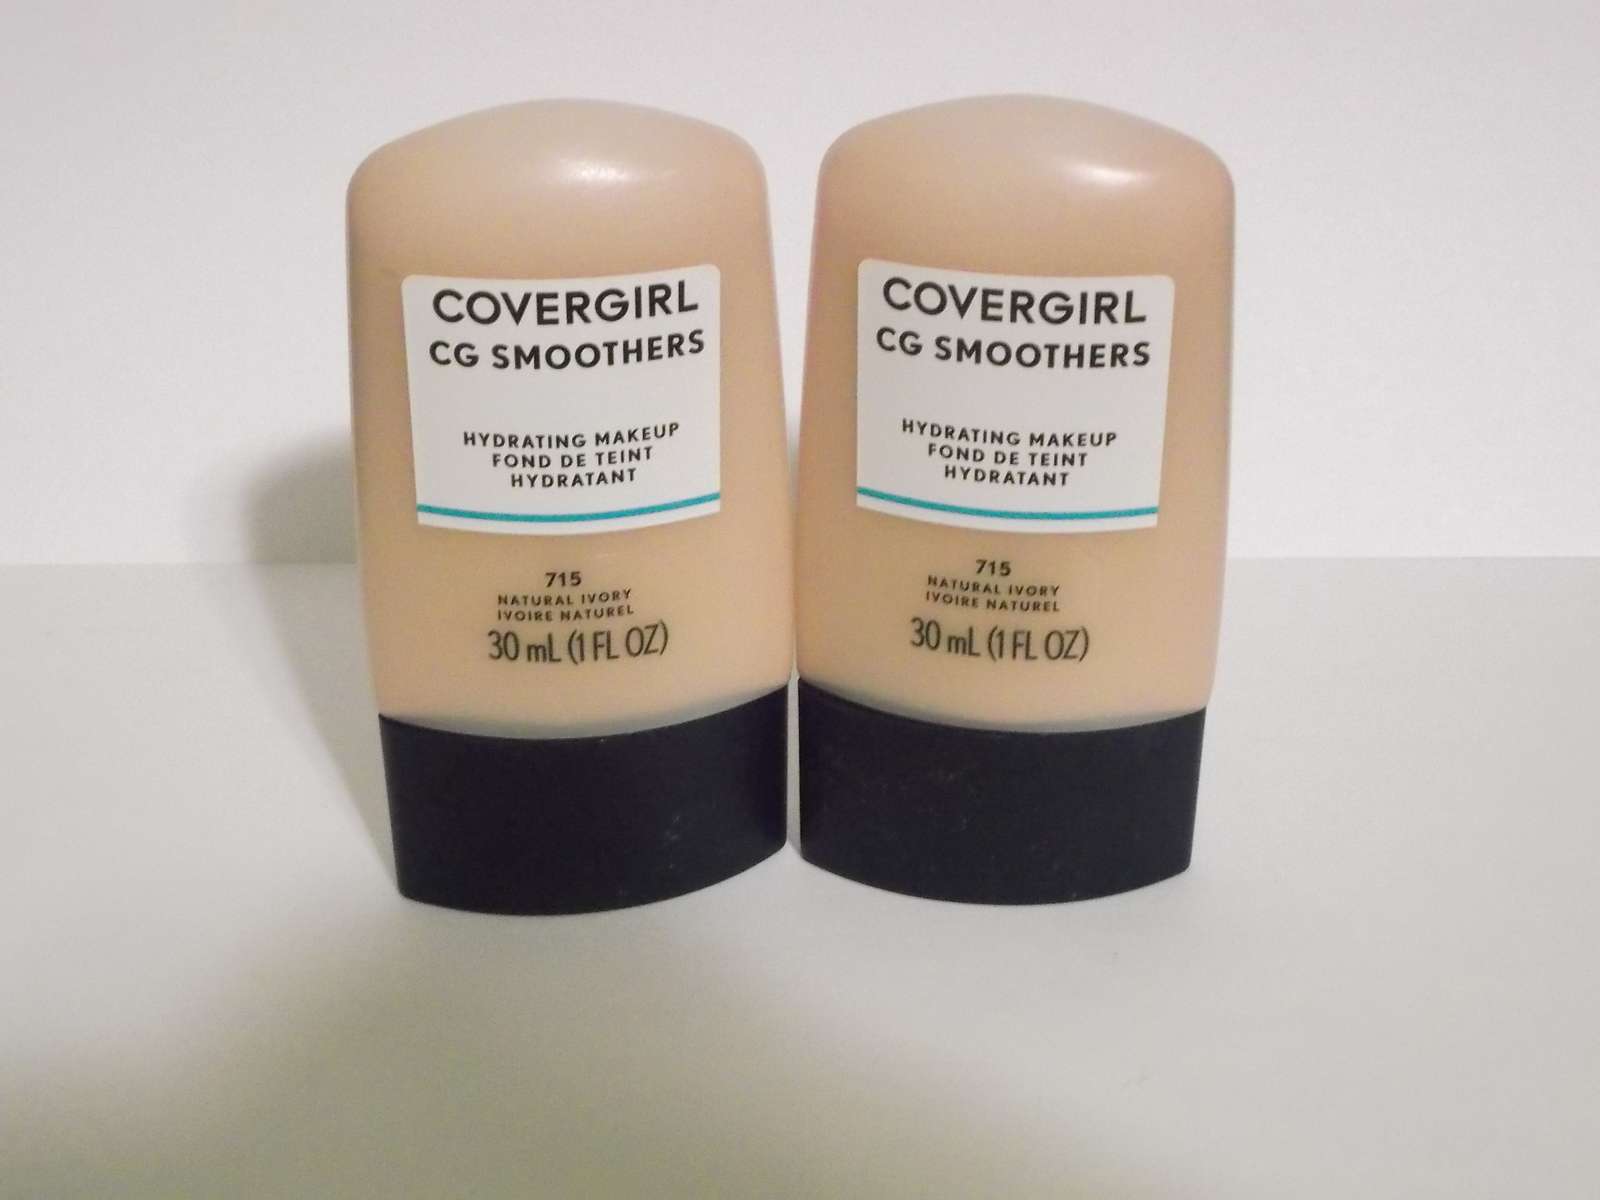 2X Covergirl CG Smoothers Hydrating Makeup Natural Ivory #715 - 2 Pack - $19.95